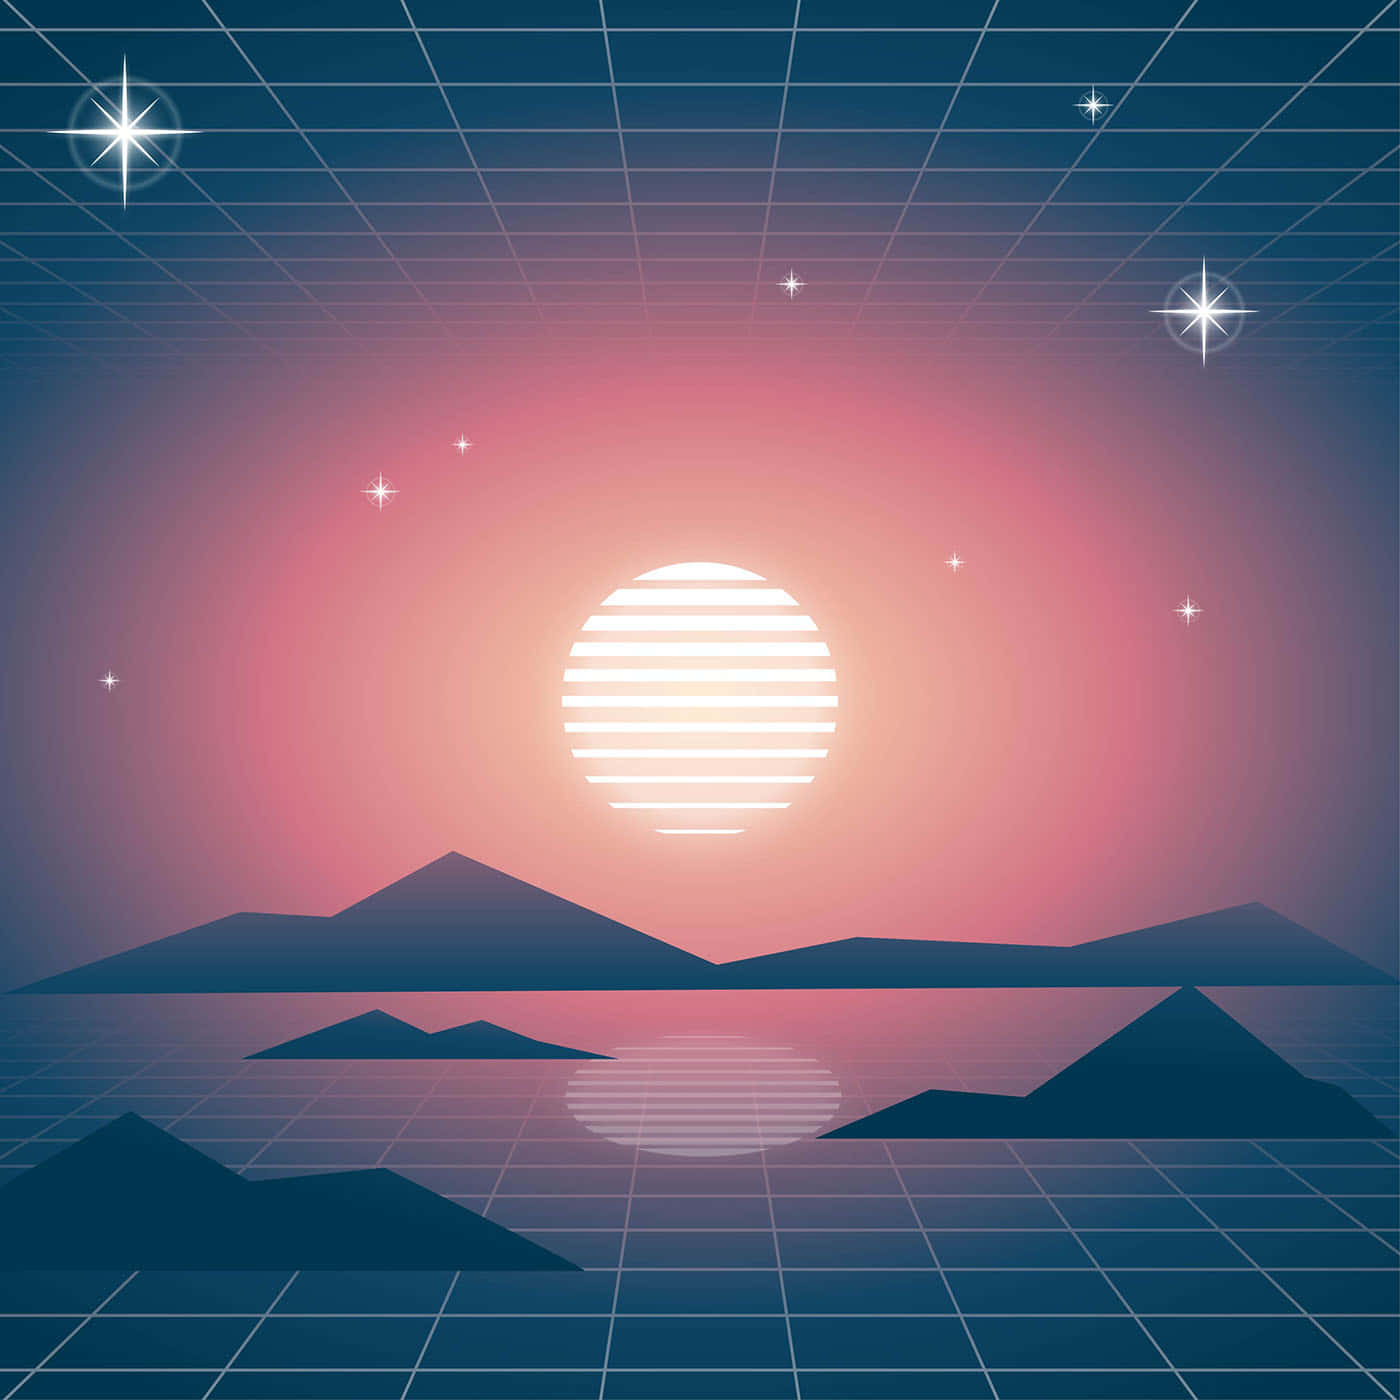 A Retro Style Landscape With Mountains And A Sun